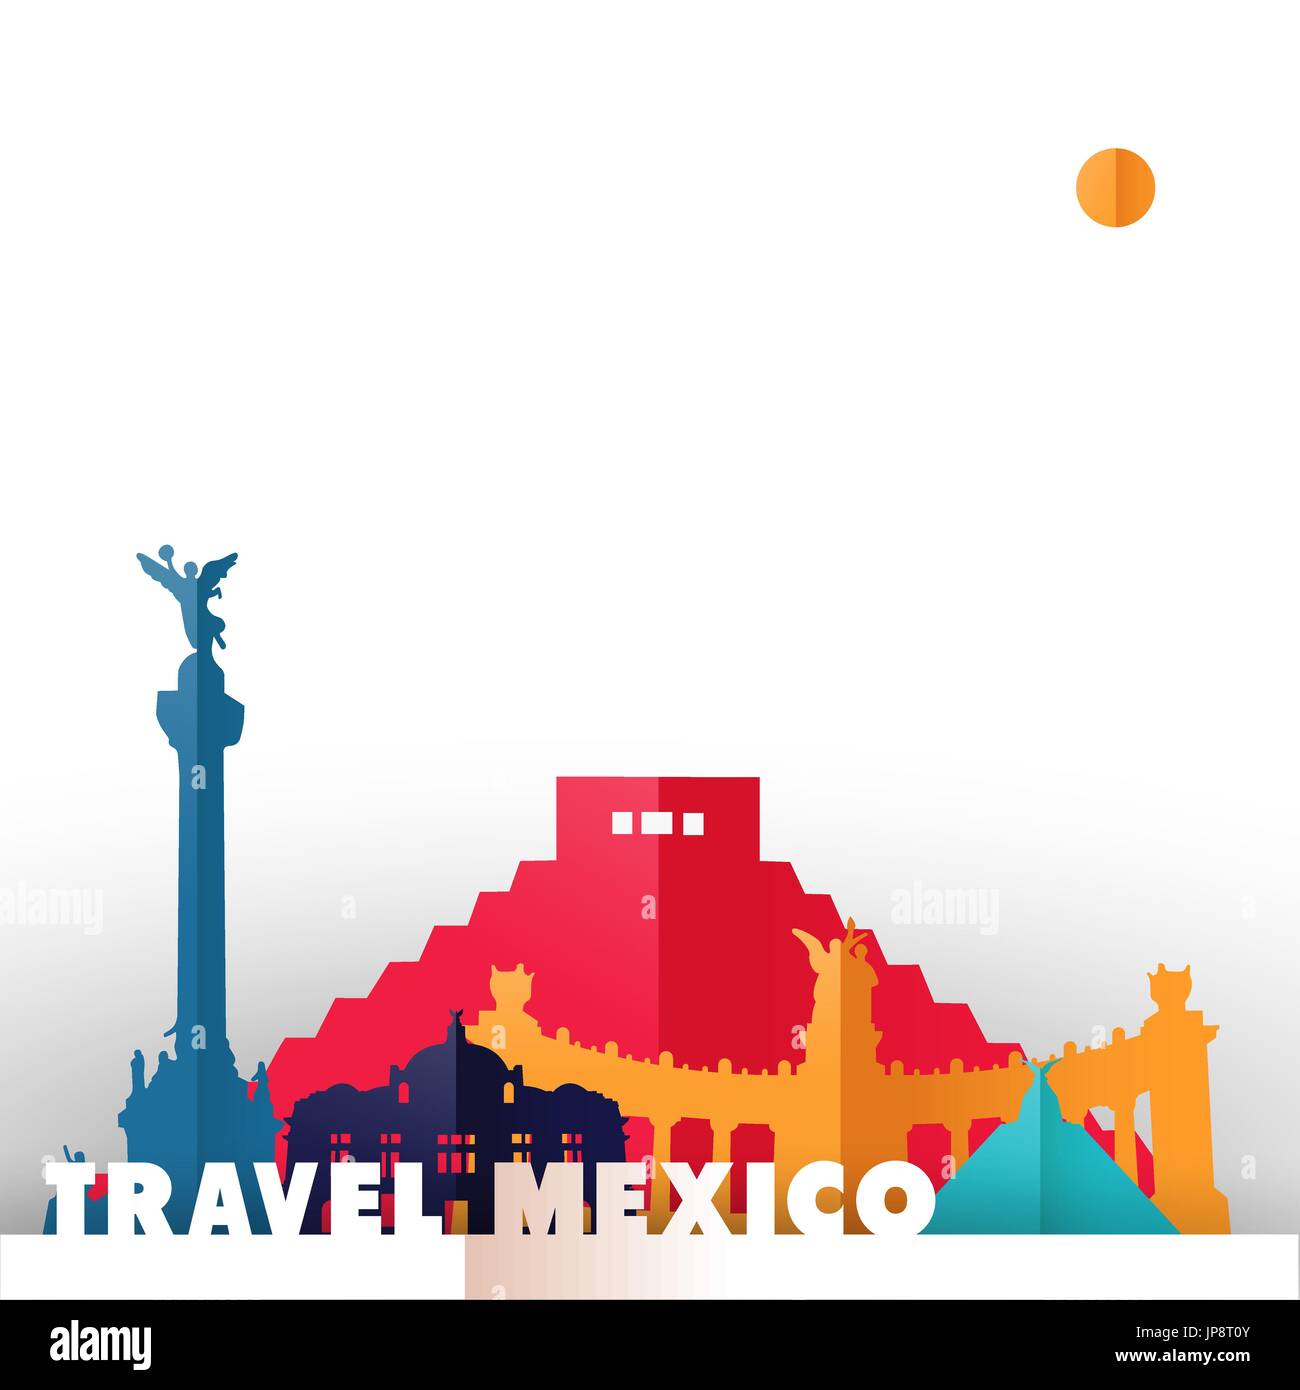 Travel Mexico concept illustration in paper cut style, famous world landmarks of mexican country. Includes Aztec pyramid, monument to independence, fi Stock Vector